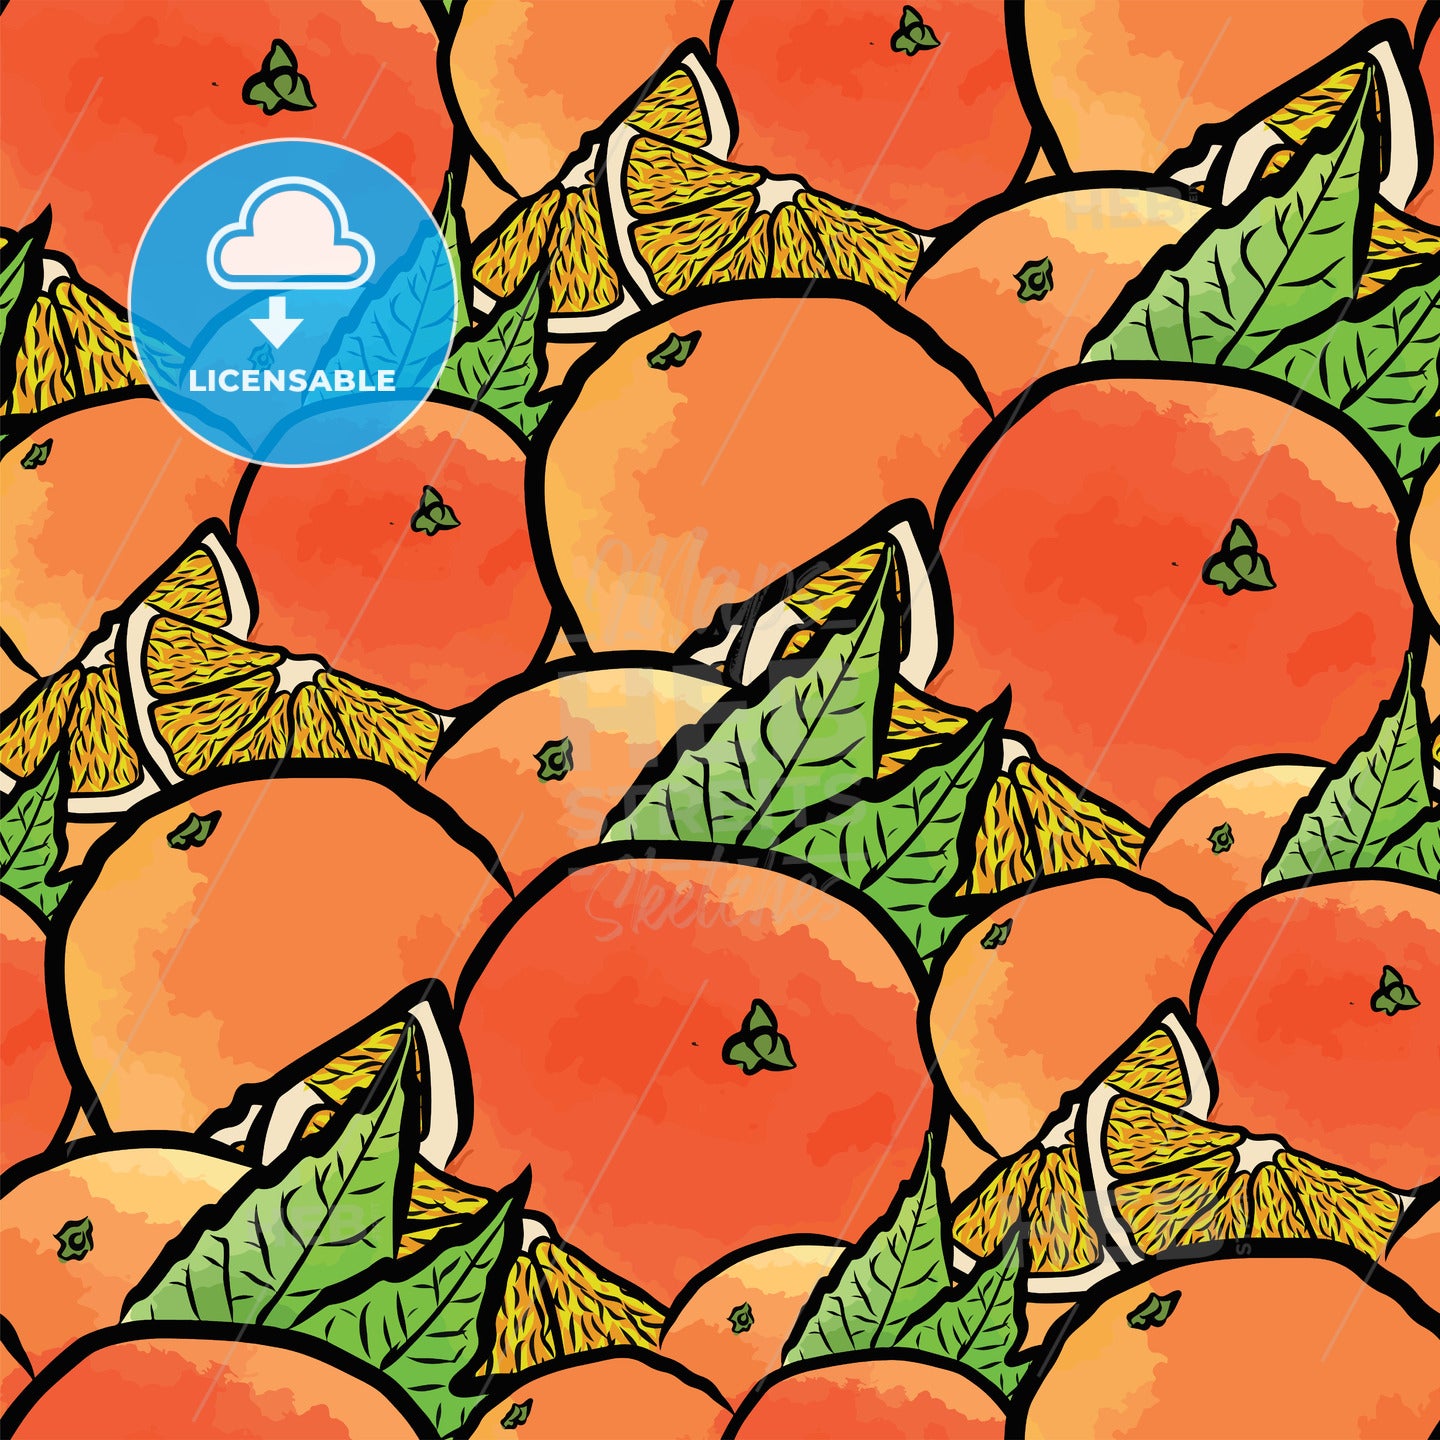 seamless pattern of oranges – instant download